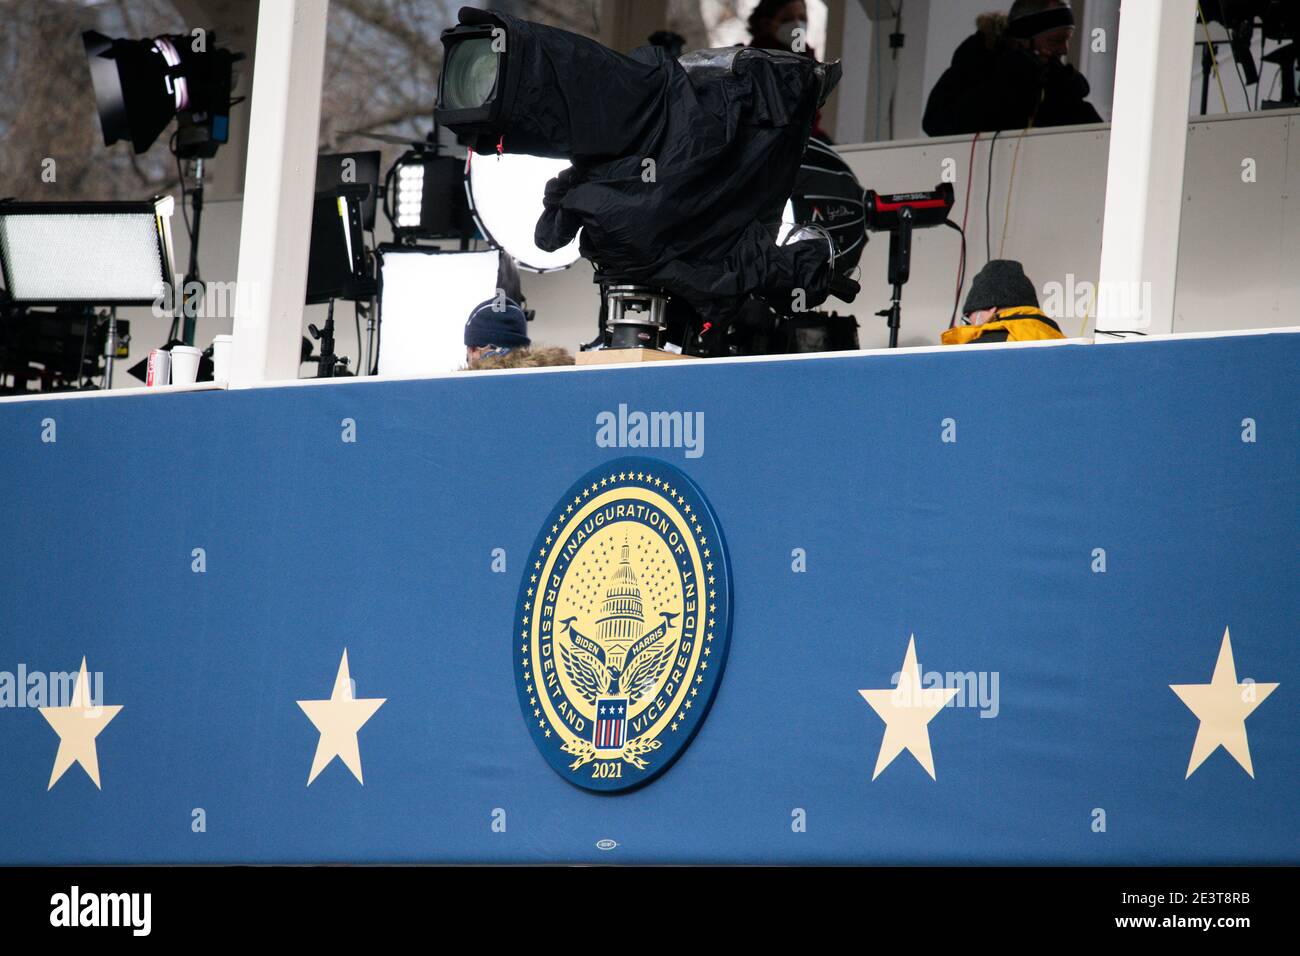 Washington, USA. 20th Jan, 2021. The Presidential Inauguration Seal on the press risers at the White House in Washington, DC, on Inauguration Day, January 20, 2021. Today, President Elect Joe Biden and Vice President Elect and Kamala Harris will be Inaugurated at the U.S. Capitol, where 2 weeks earlier an insurrectionist mob tried to disrupt the certification of the Electoral College. (Graeme Sloan/Sipa USA) Credit: Sipa USA/Alamy Live News Stock Photo